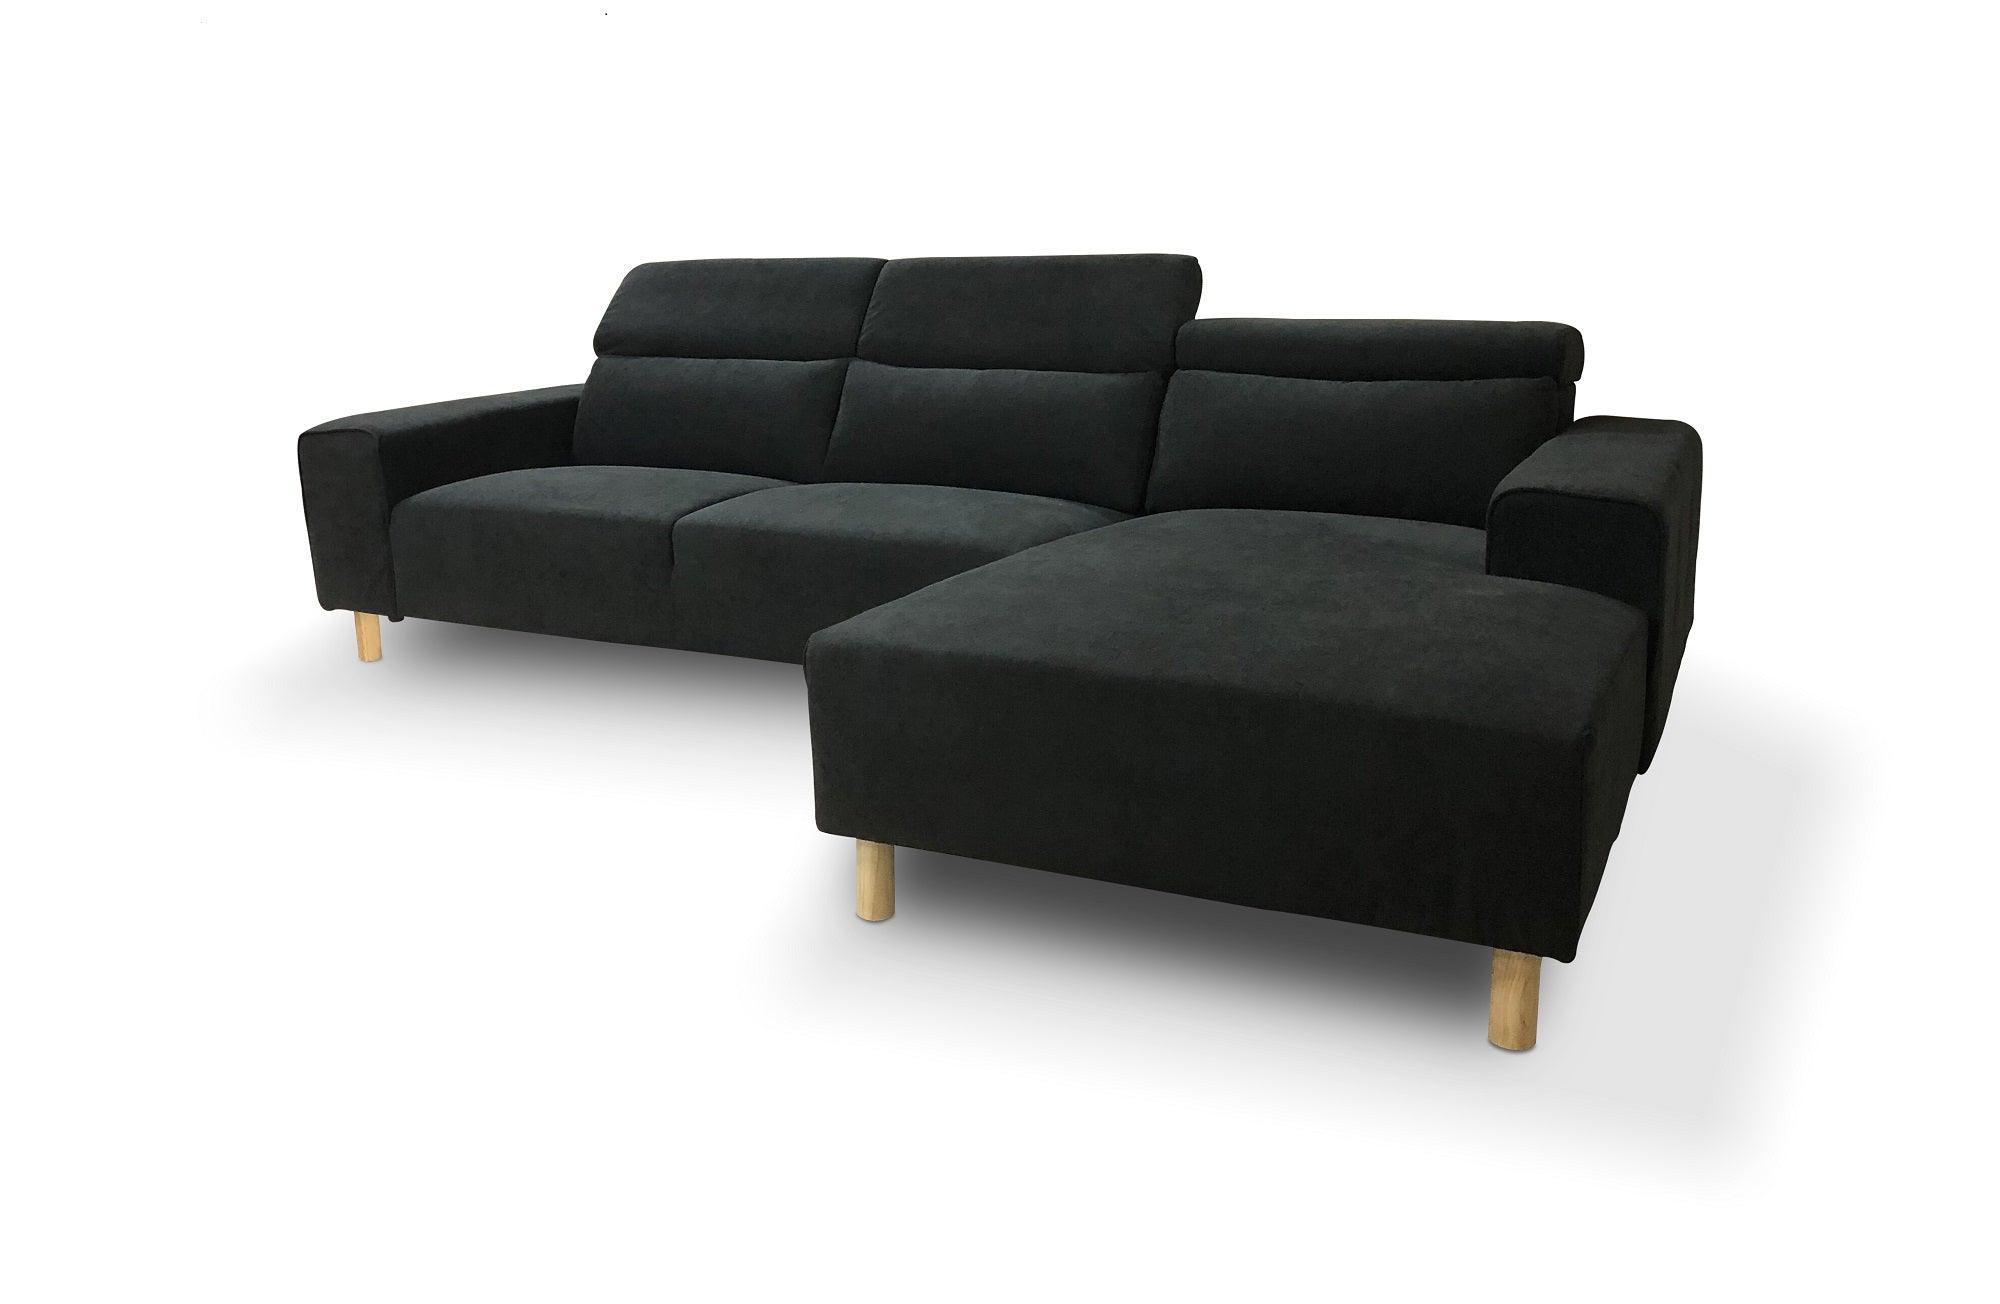 Seoul (Outright Payment SOLD AS IS) 3 Seater Fabric Corner Sofa with Chaise and Adjustable Headrest - The A2Z Furniture